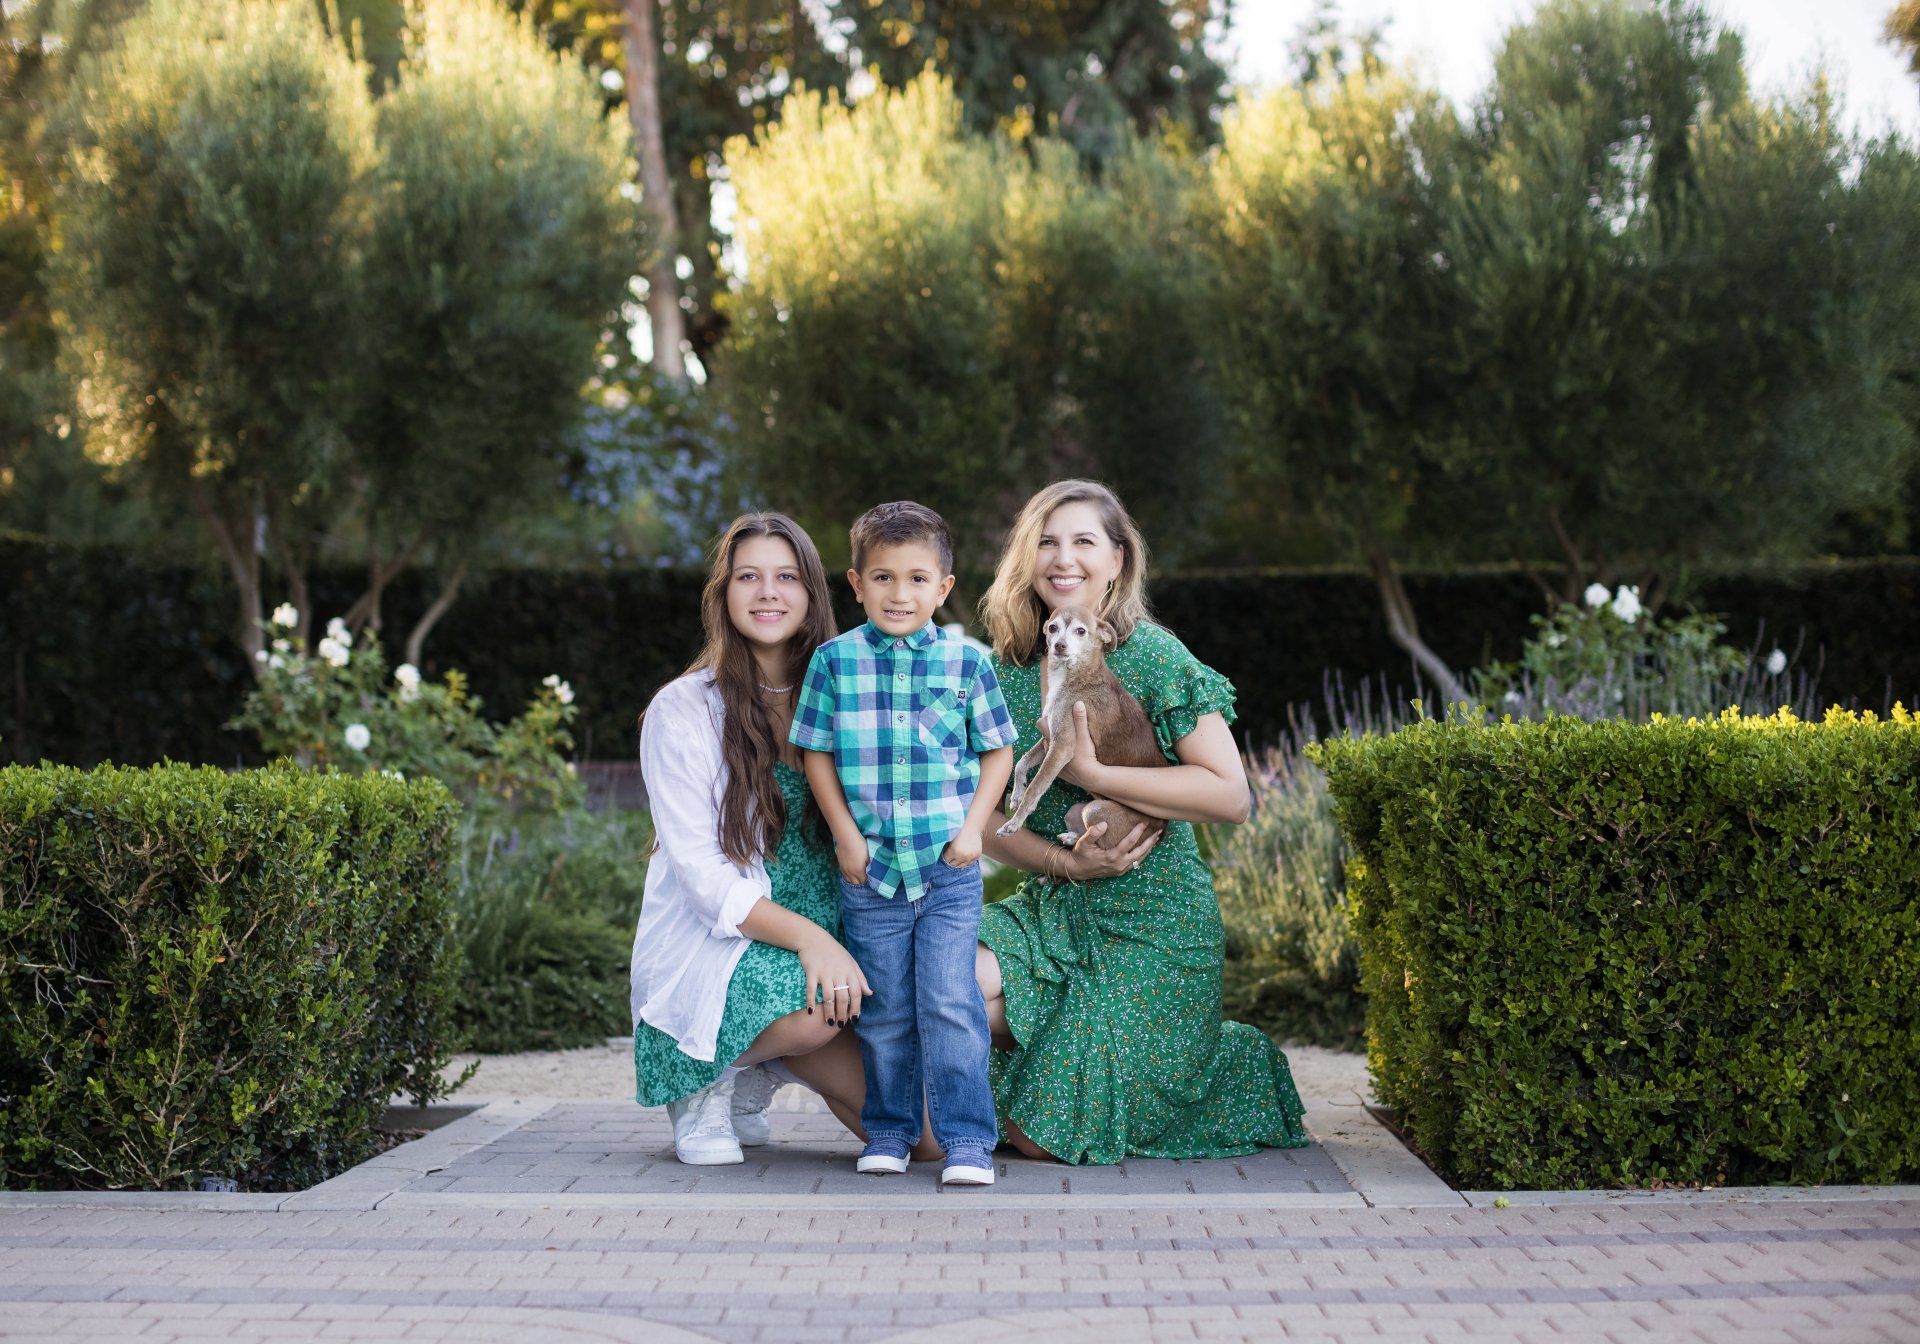 What to wear for your next family photo session in Orange County